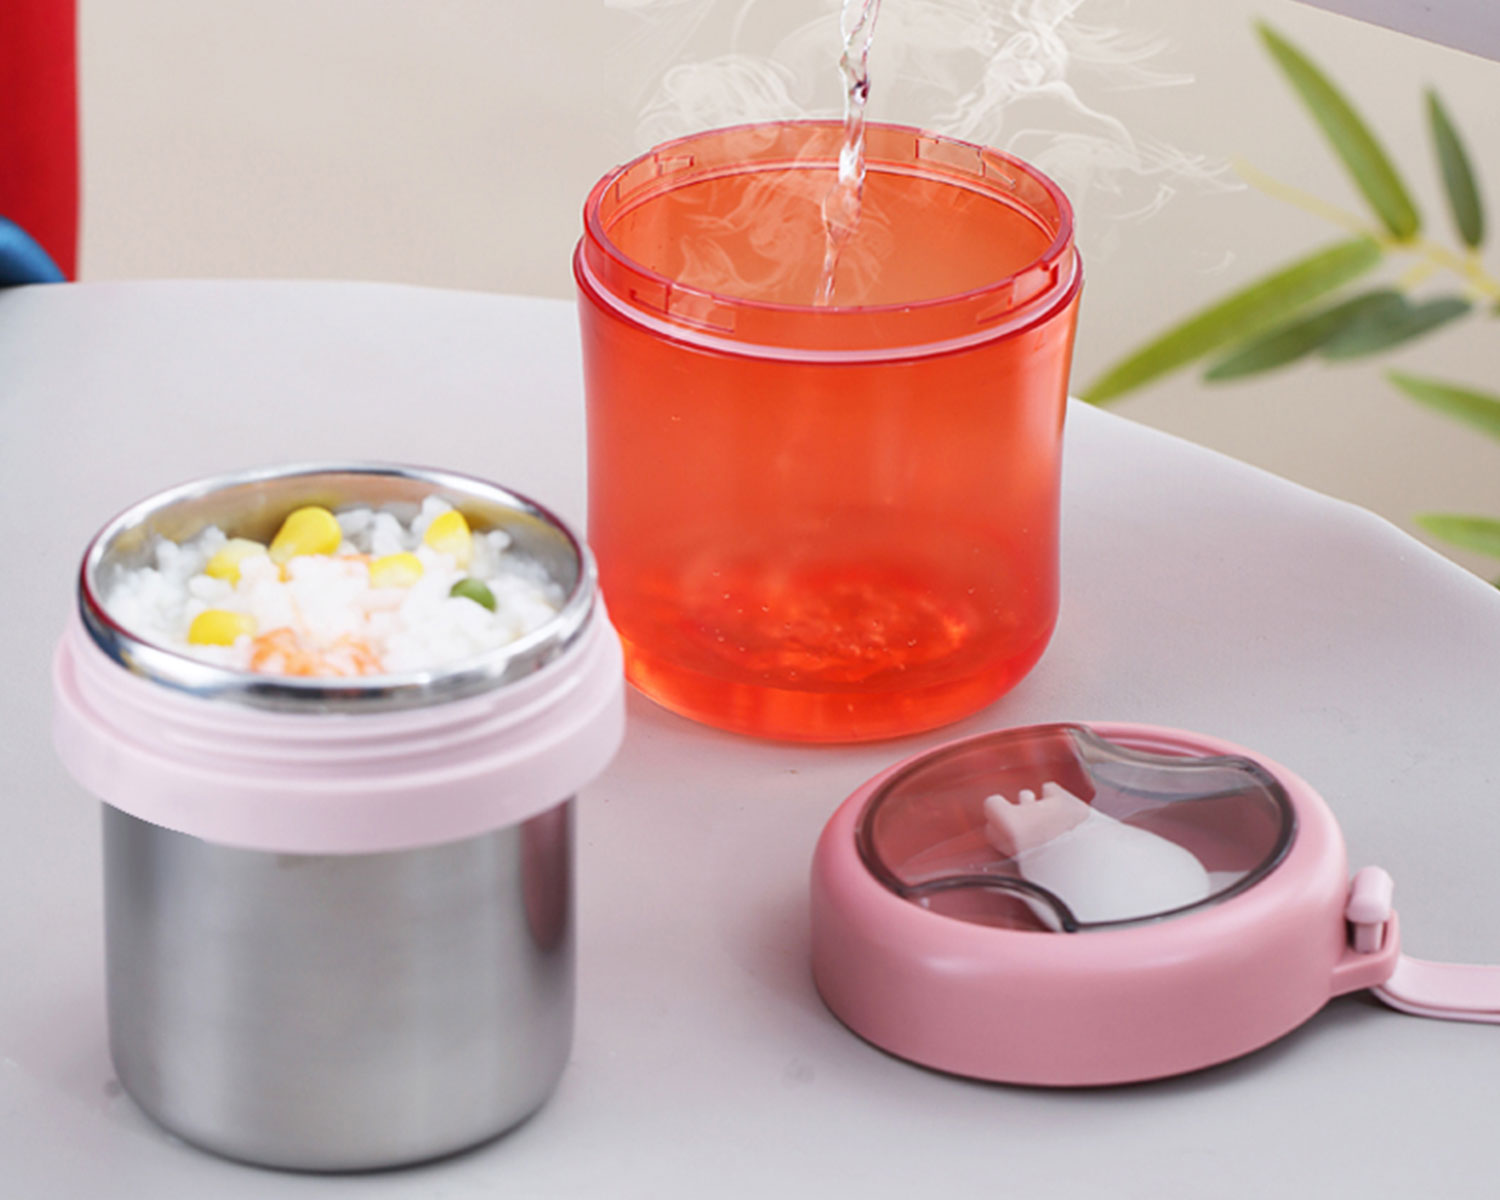 Portable Food Storage Containers